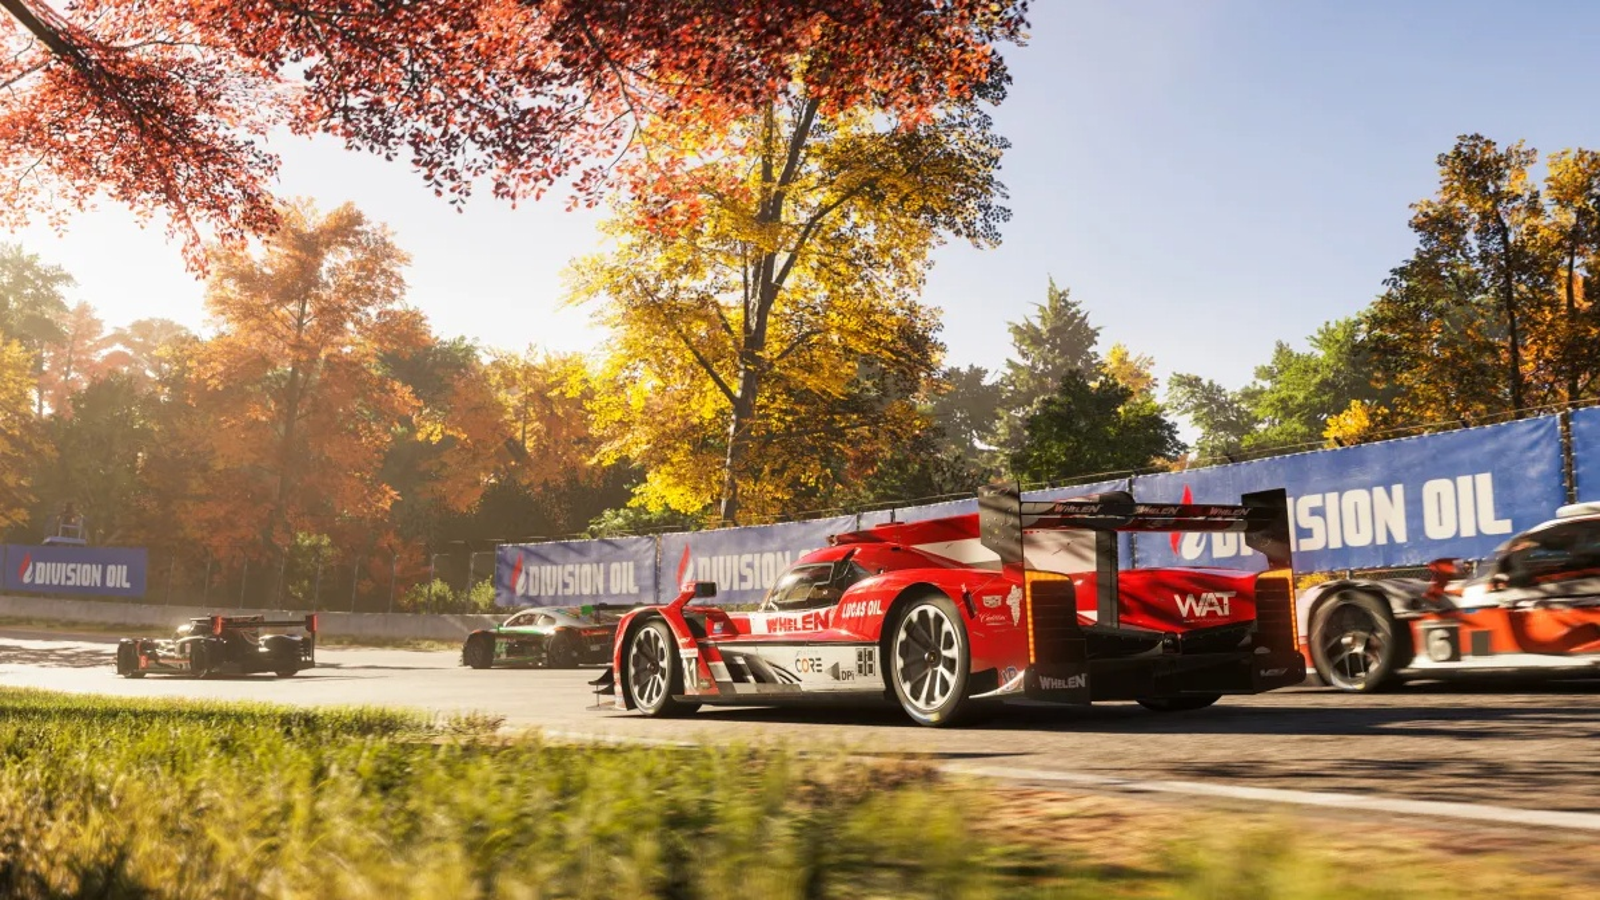 Forza Motorsport Shows off First Gameplay with On-Track Ray